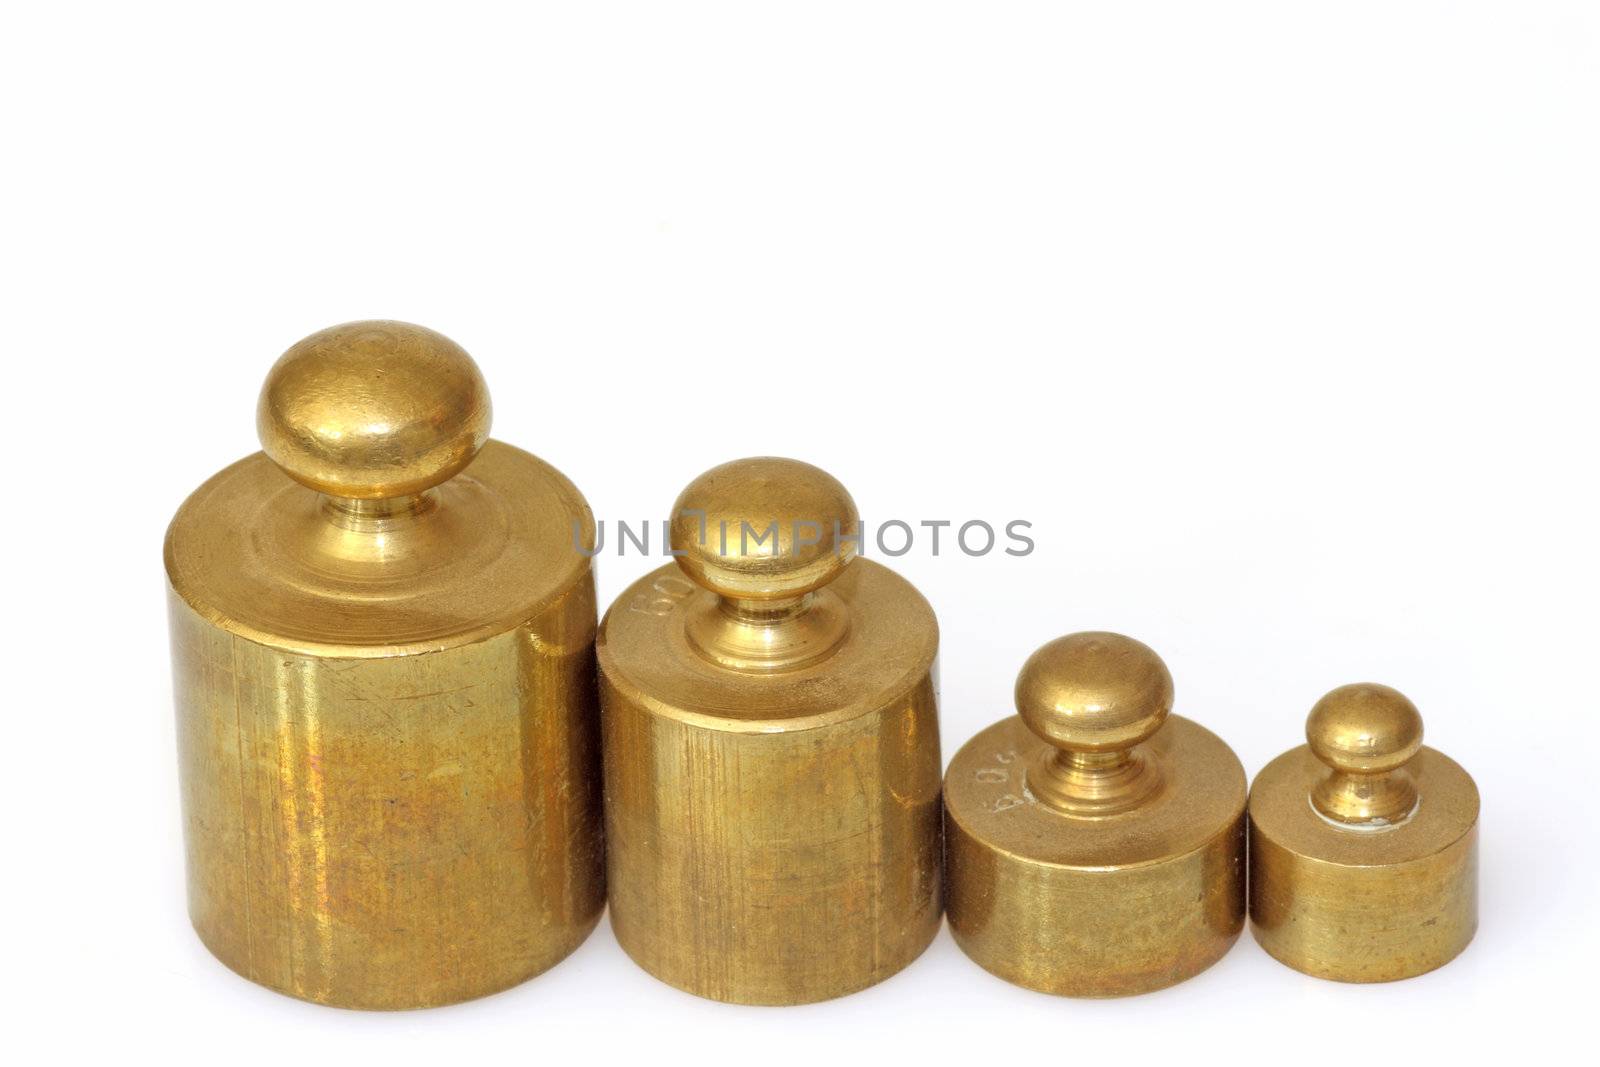 A set of lead weights isolated on whtie background
